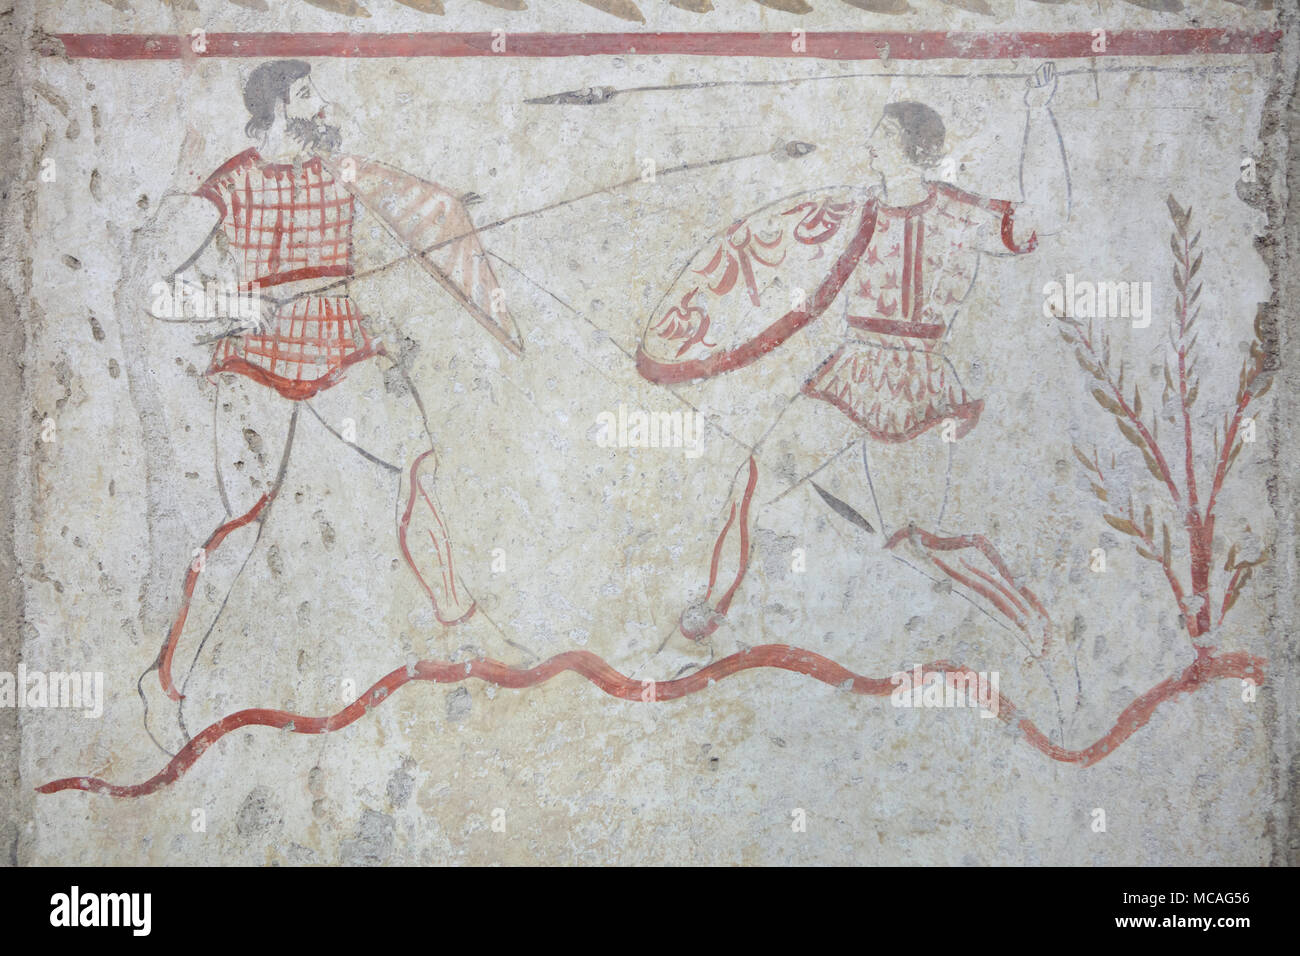 Duel of warriors depicted in the Lucanian fresco from 375-350 BC from the Tomb 1 of the Arcioni Necropolis on display in the Paestum Archaeological Museum (Museo archeologico di Paestum) in Paestum, Campania, Italy. Stock Photo